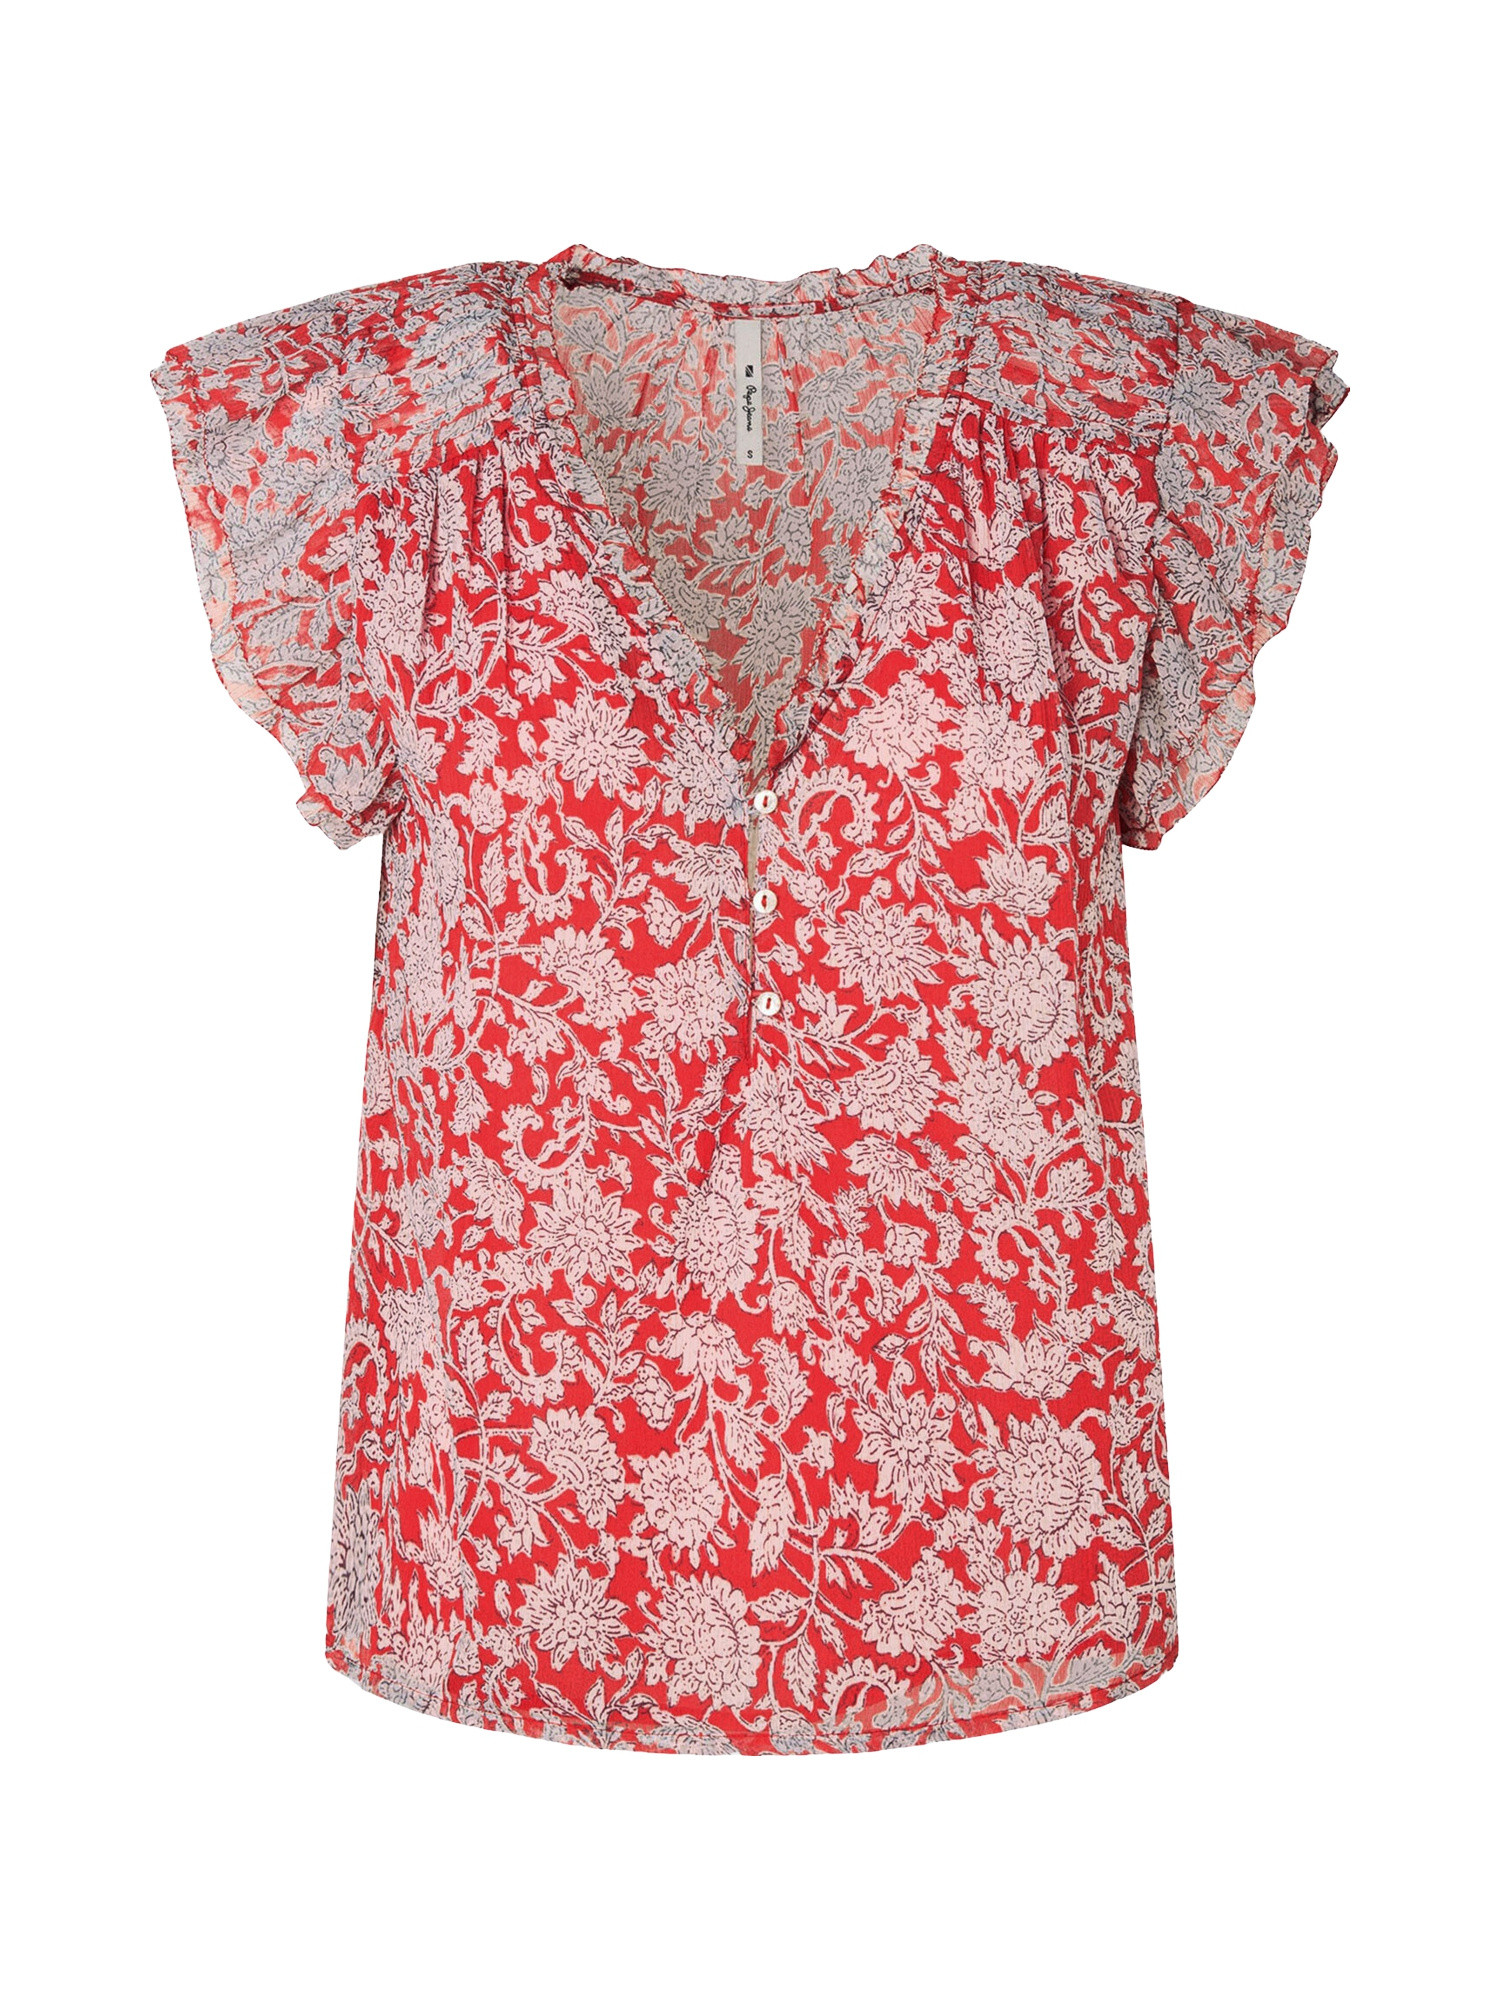 Pepe Jeans - Top a fantasia, Rosso, large image number 0